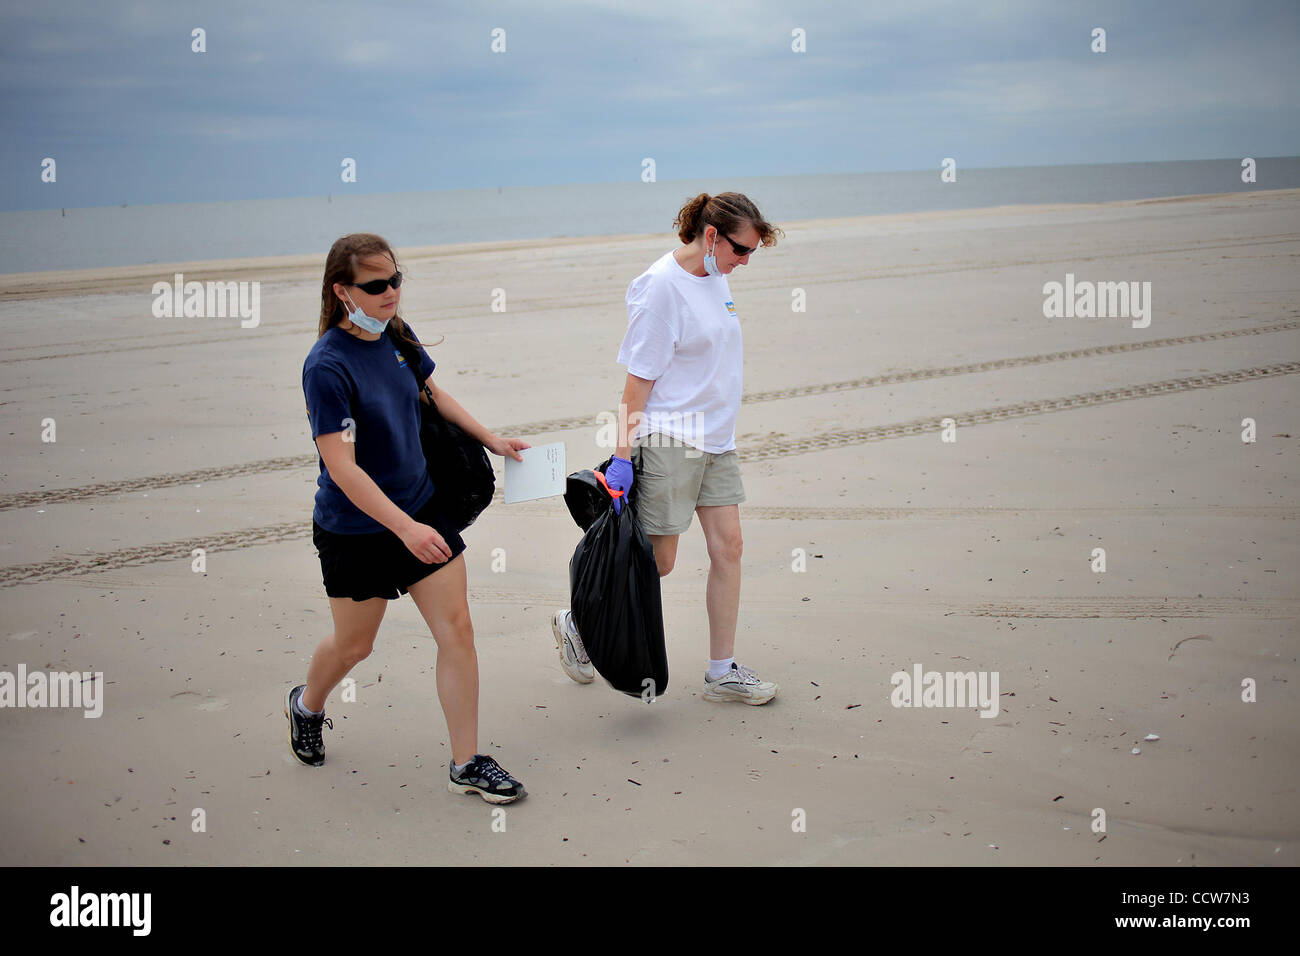 GULFPORT, MISSISSIPPI -- From right, Wendy Hachett, a first responder from the Institute for Marine Mammal Studies, and Megan Broadway, a research assistant with the organization, carry a dead sea turtle inside a trash bag to be taken for a necropsy Monday morning as they inspect the beach in Gulf P Stock Photo